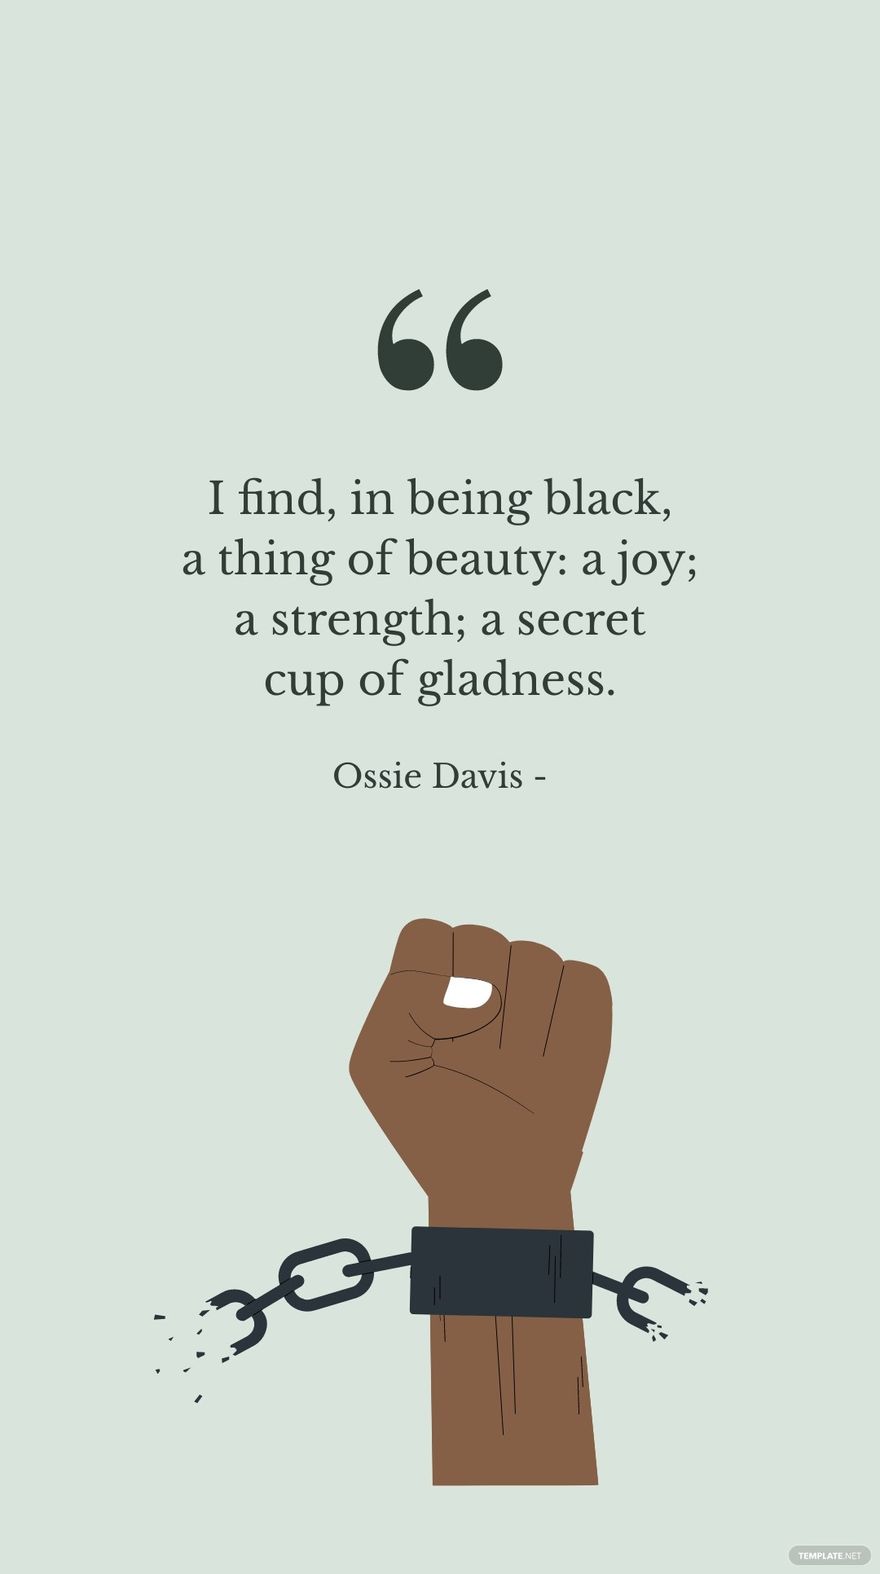 Free Ossie Davis - I find, in being black, a thing of beauty: a joy; a strength; a secret cup of gladness. in JPG